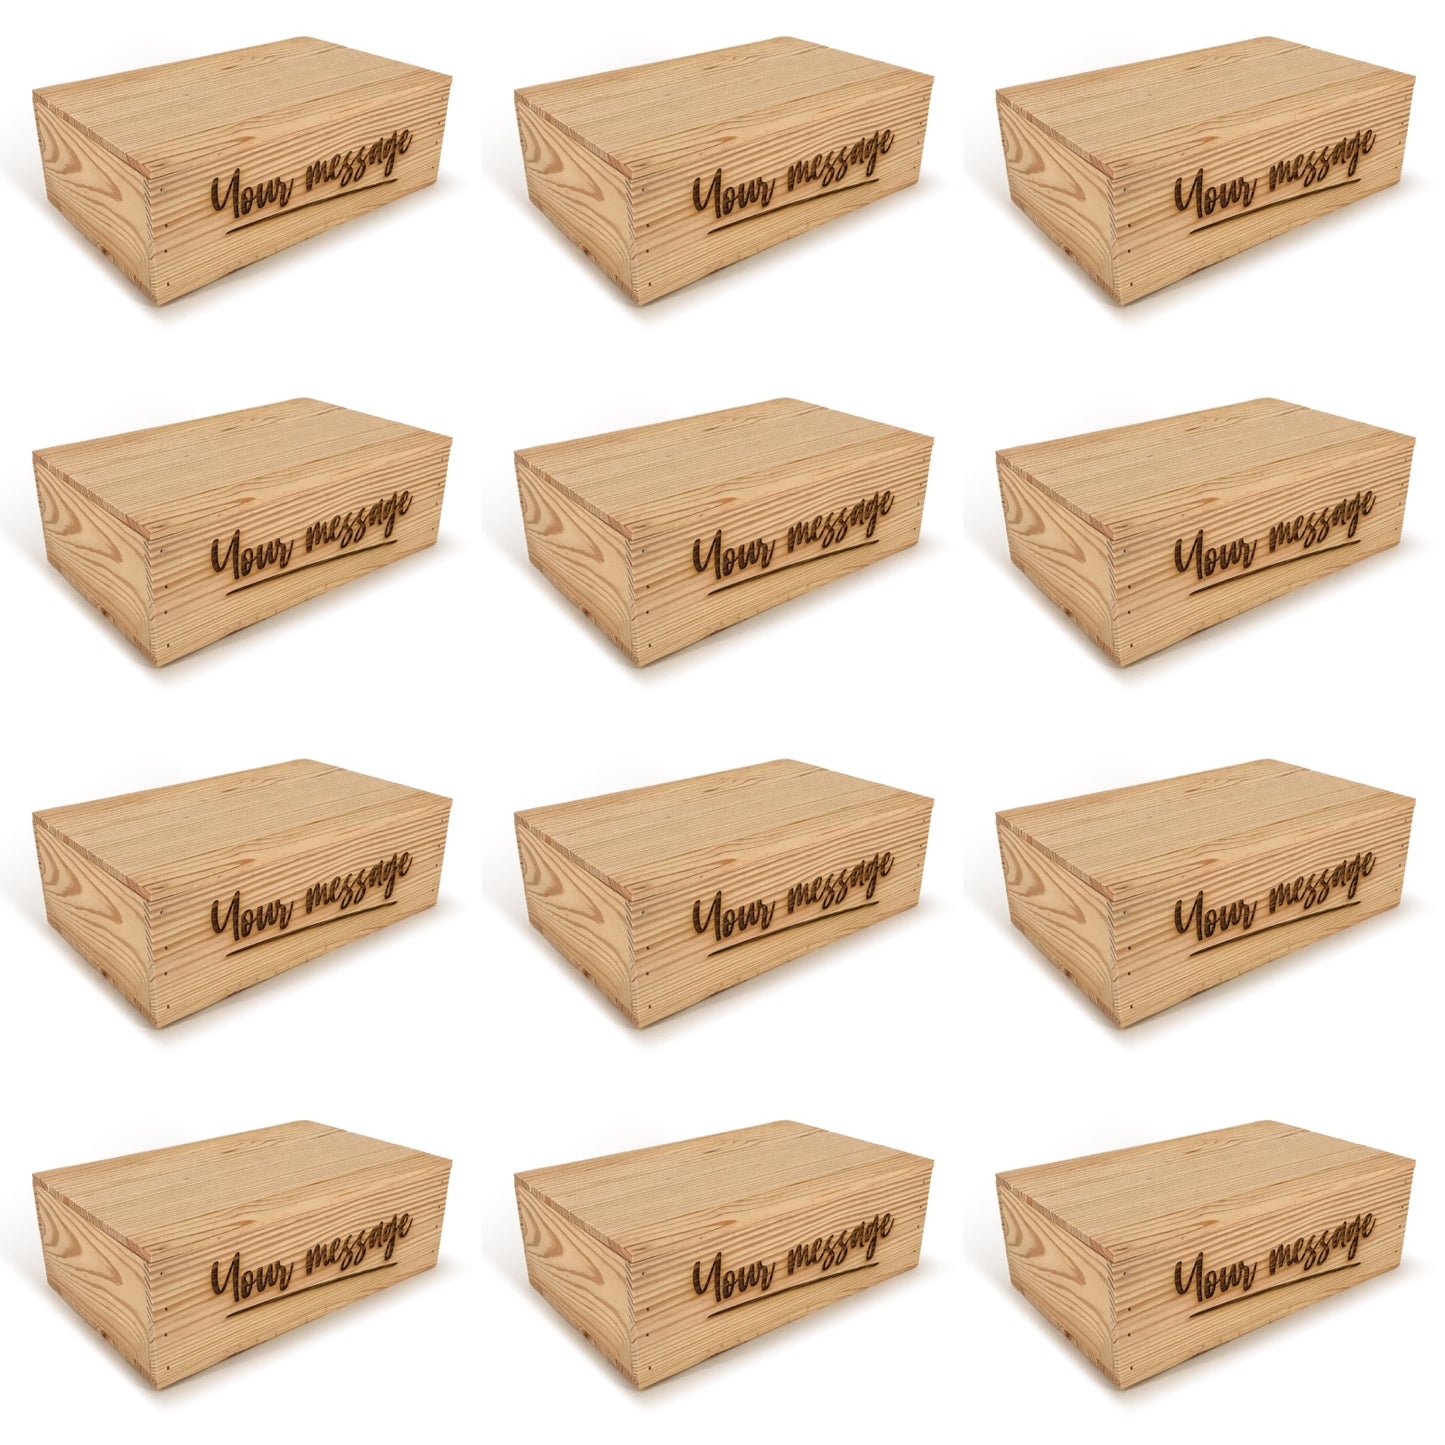 12 Two Bottle Wine Crate Boxes with Lid and Custom Message 14x9x4.5, 6-WB-14-9-4.5-ST-NW-LL,  12-WB-14-9-4.5-ST-NW-LL,  24-WB-14-9-4.5-ST-NW-LL,  48-WB-14-9-4.5-ST-NW-LL,  96-WB-14-9-4.5-ST-NW-LL